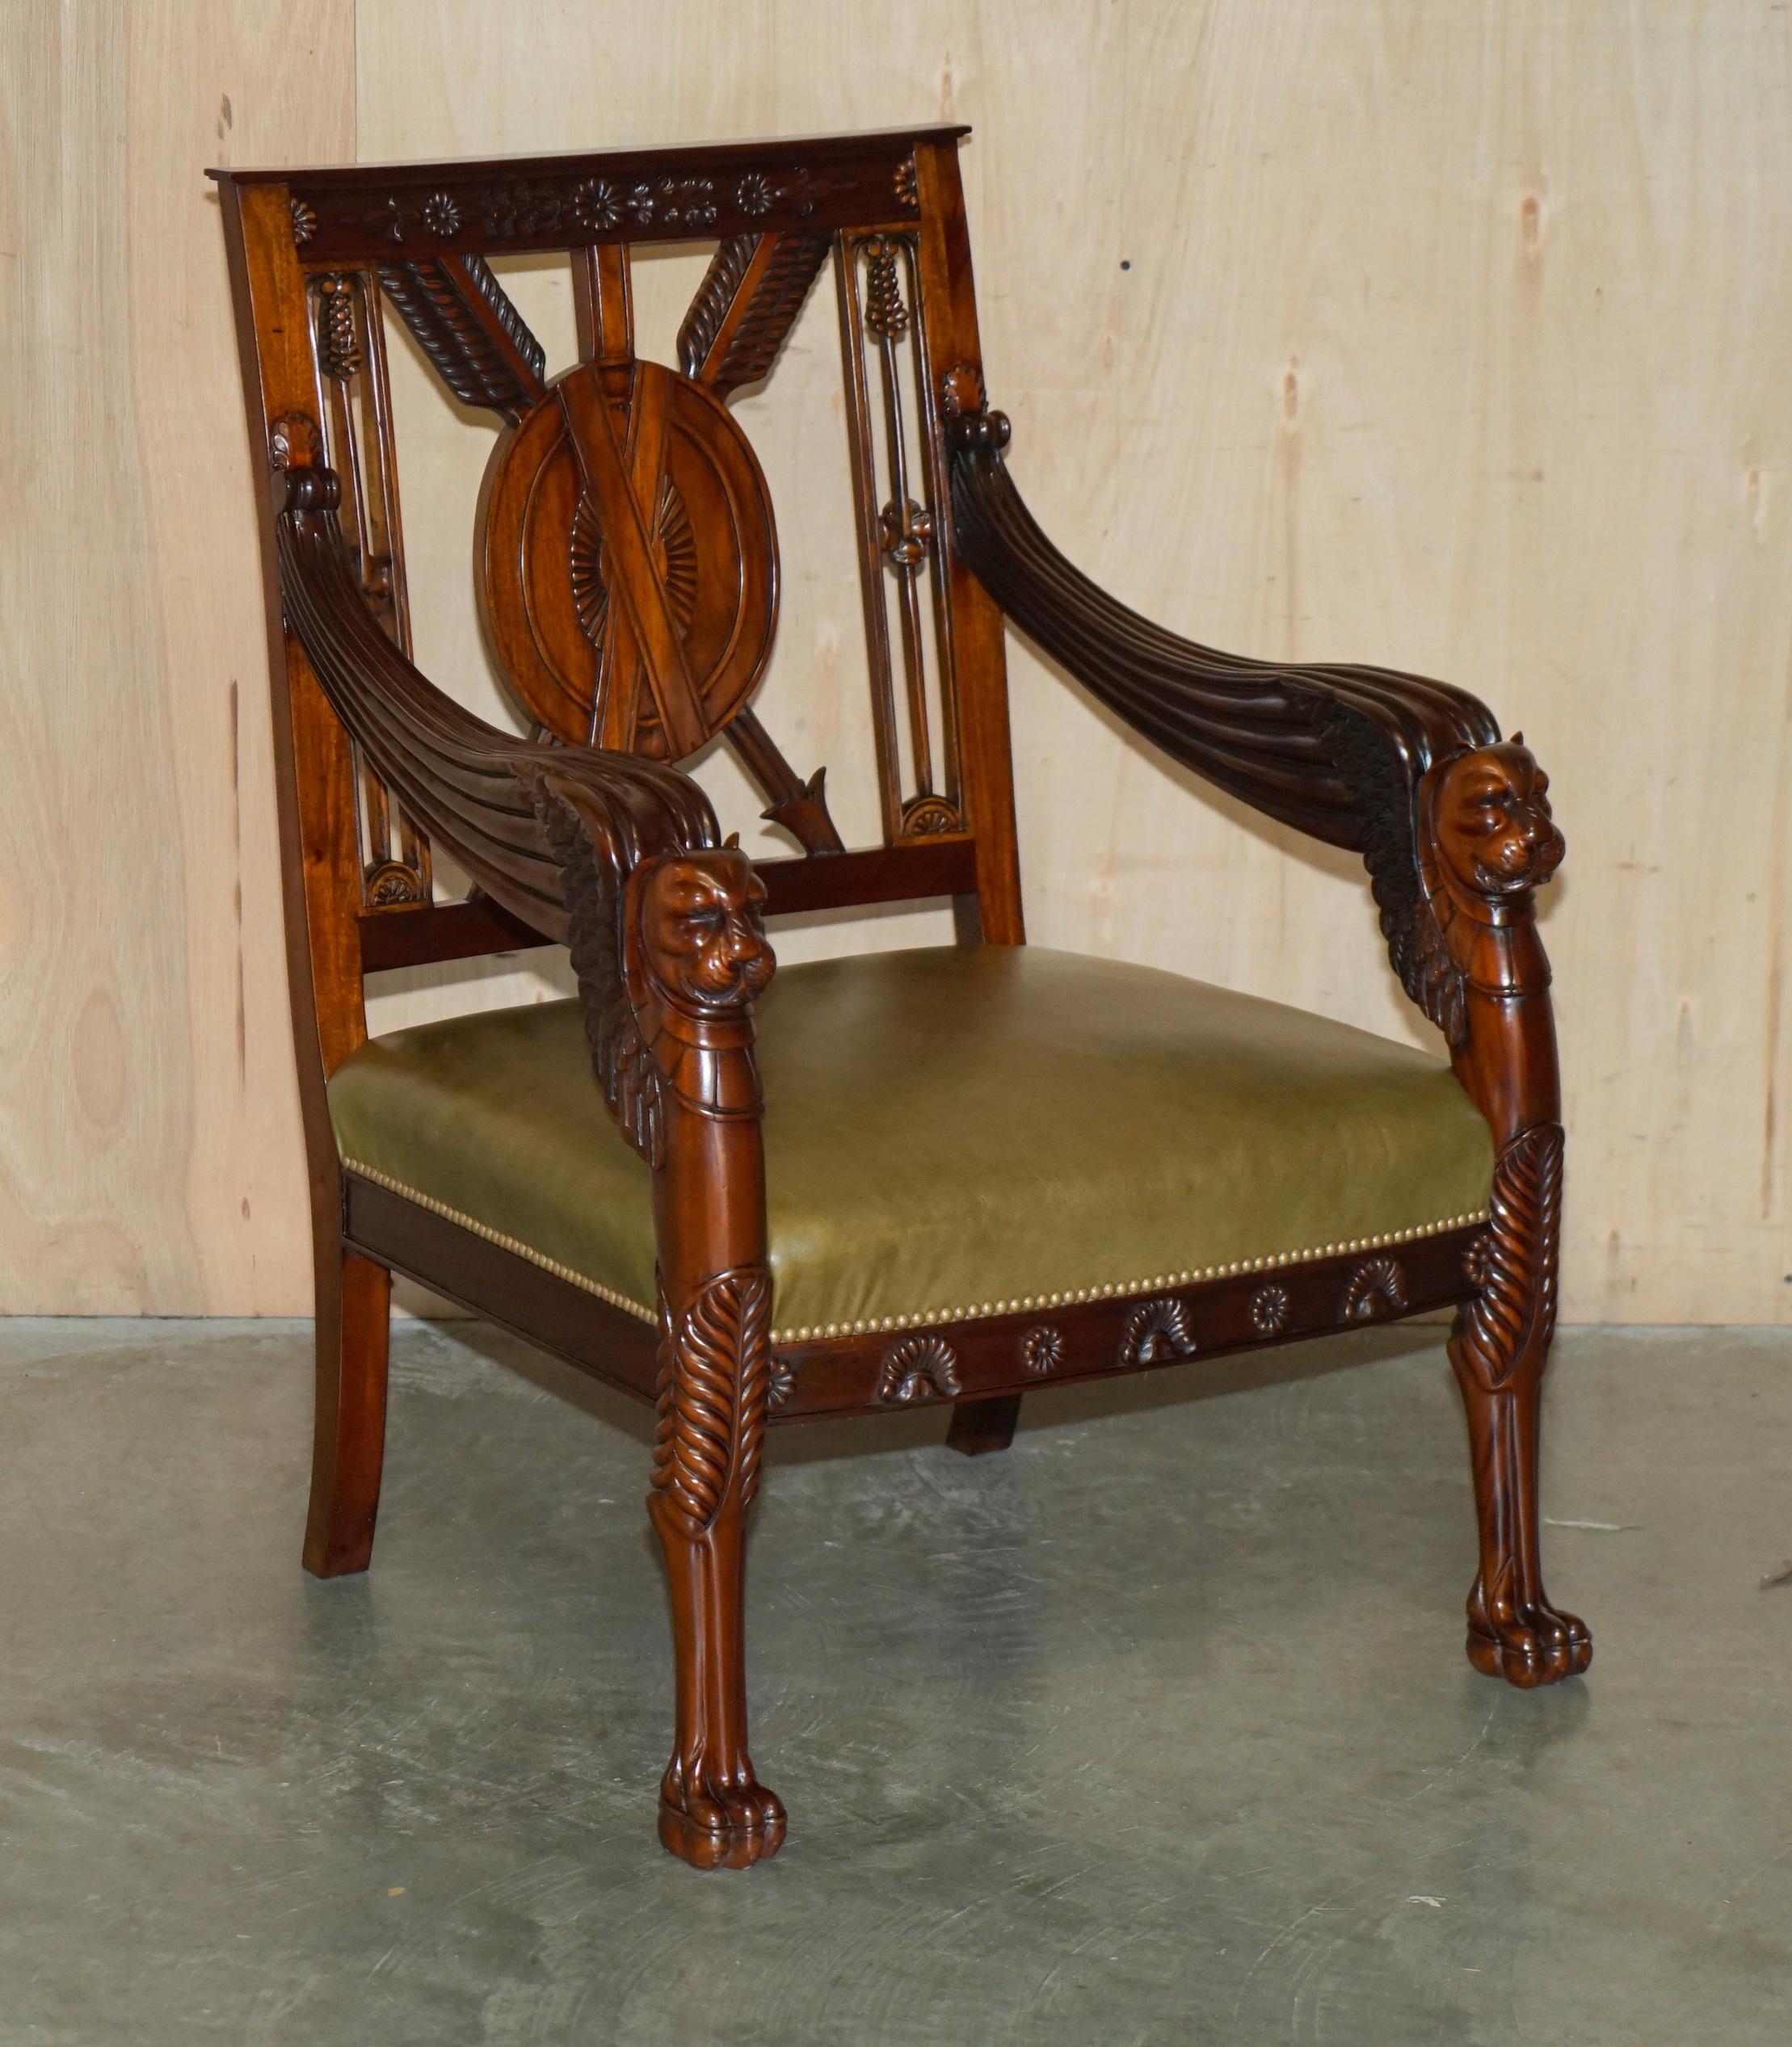 EXQUISITE PAIR OF HAND CARVED HARDWOOD LiBRARY ARMCHAIRS LION GRIFFON WING ARMS For Sale 13